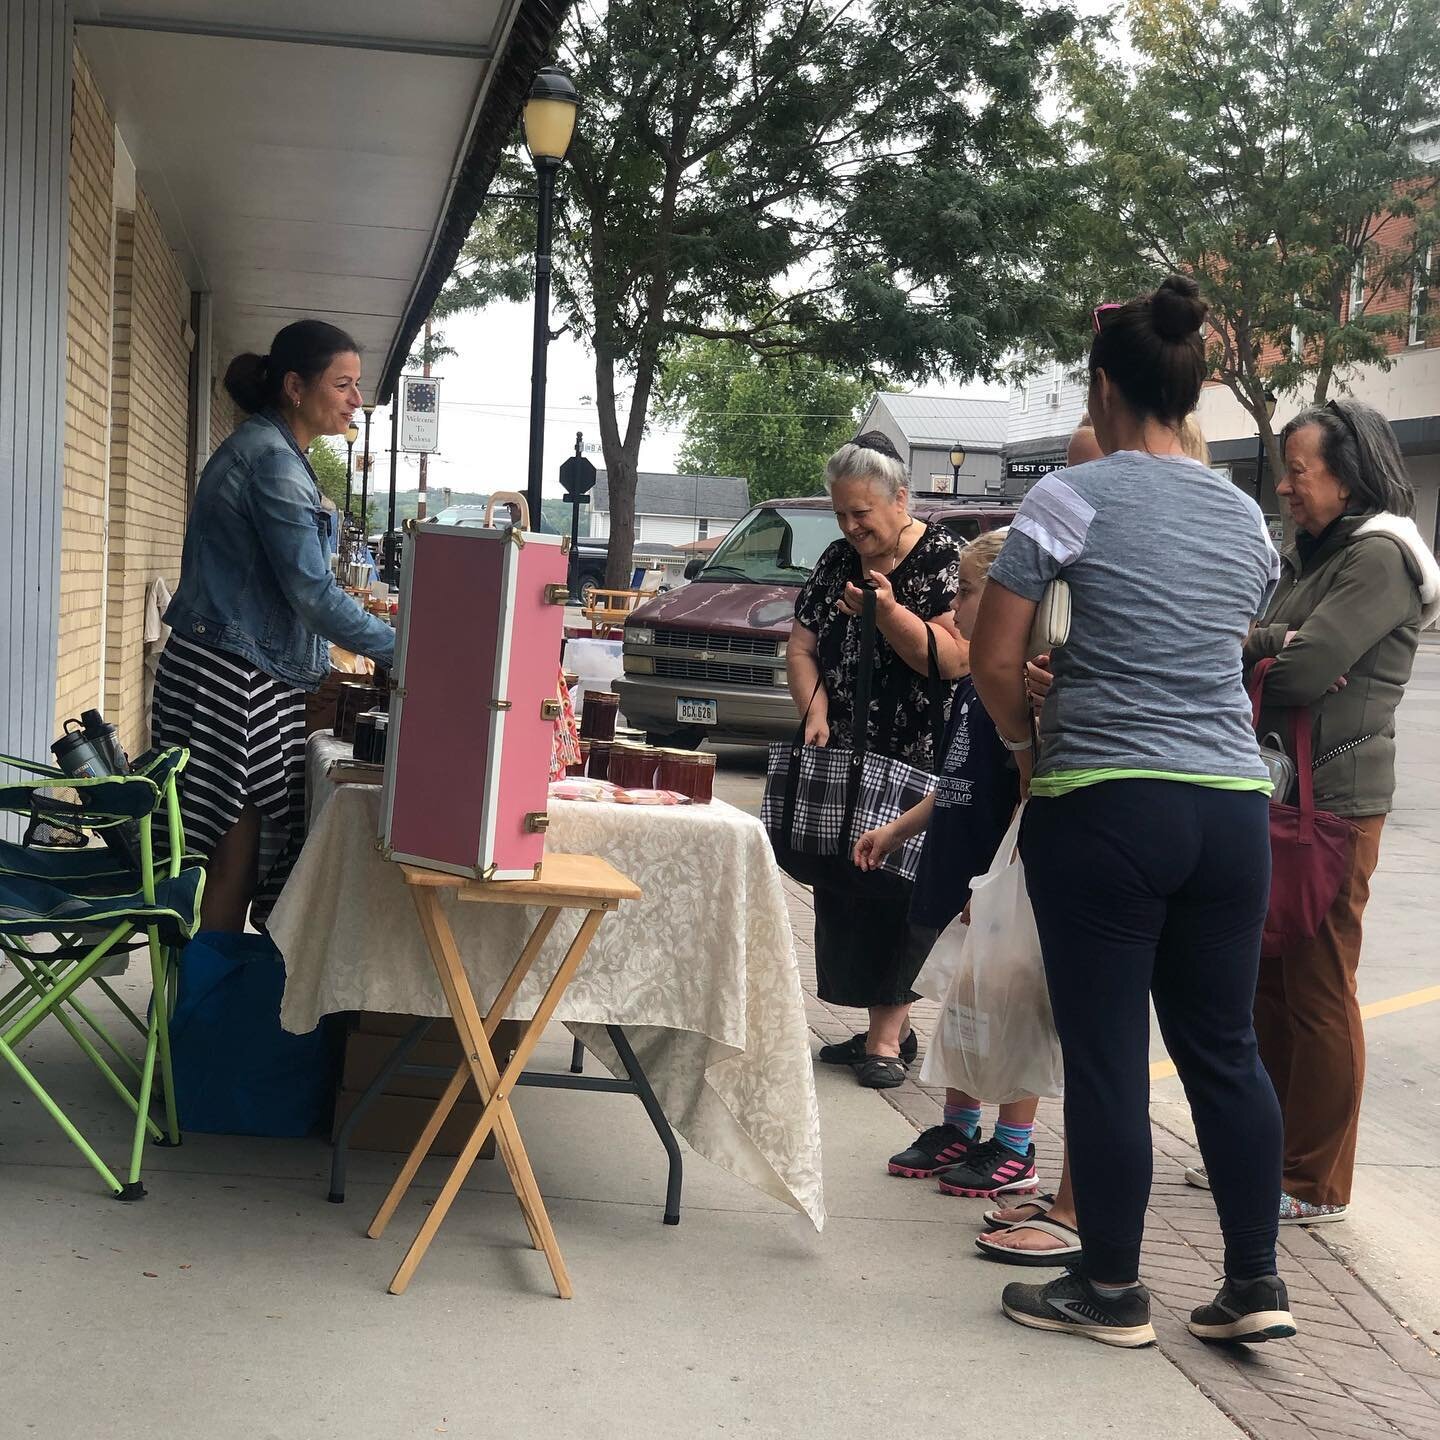 Elena Beachy makes incredible macarons, jellies, and butter horns every week. Her daughter has made some homemade doll clothes as well! Find her by Eye Associates. #shoplocal #farmersmarketfinds